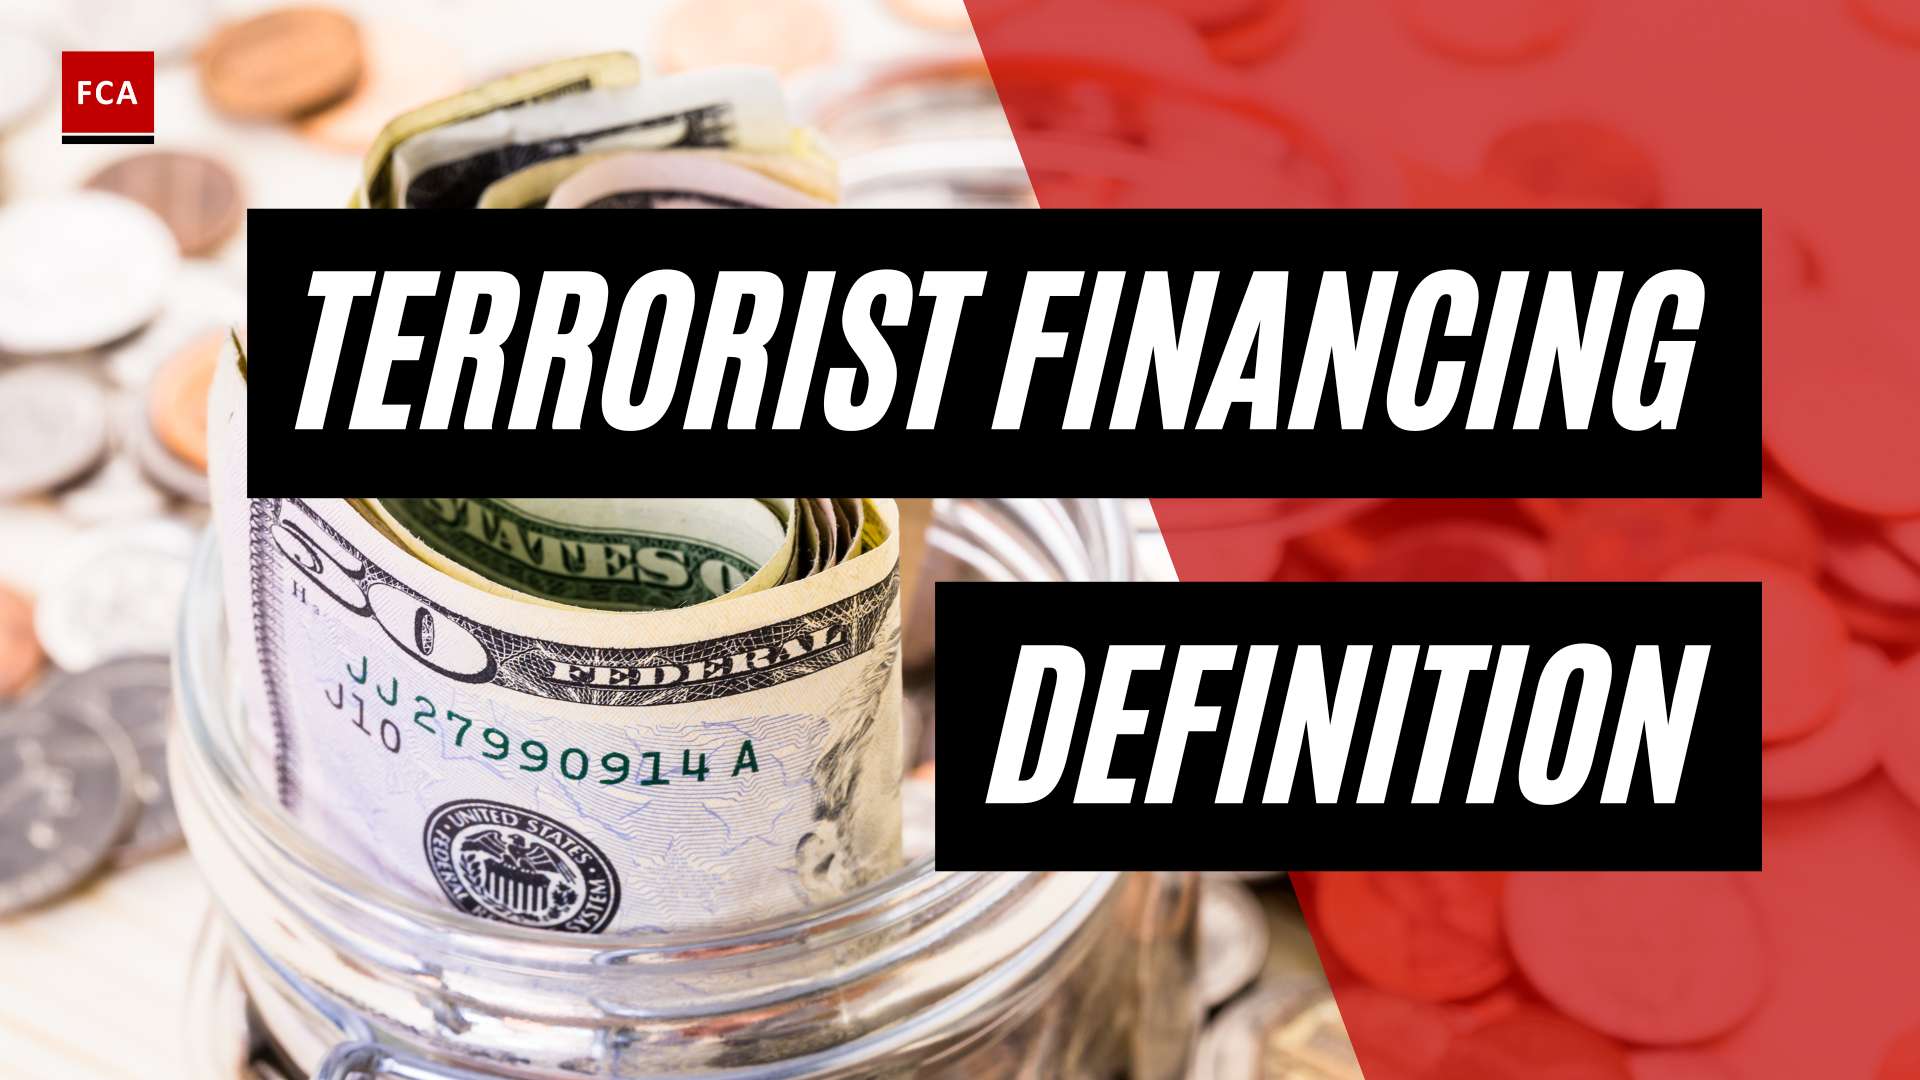 Dismantling Financial Networks: Exploring The Terrorist Financing Definition